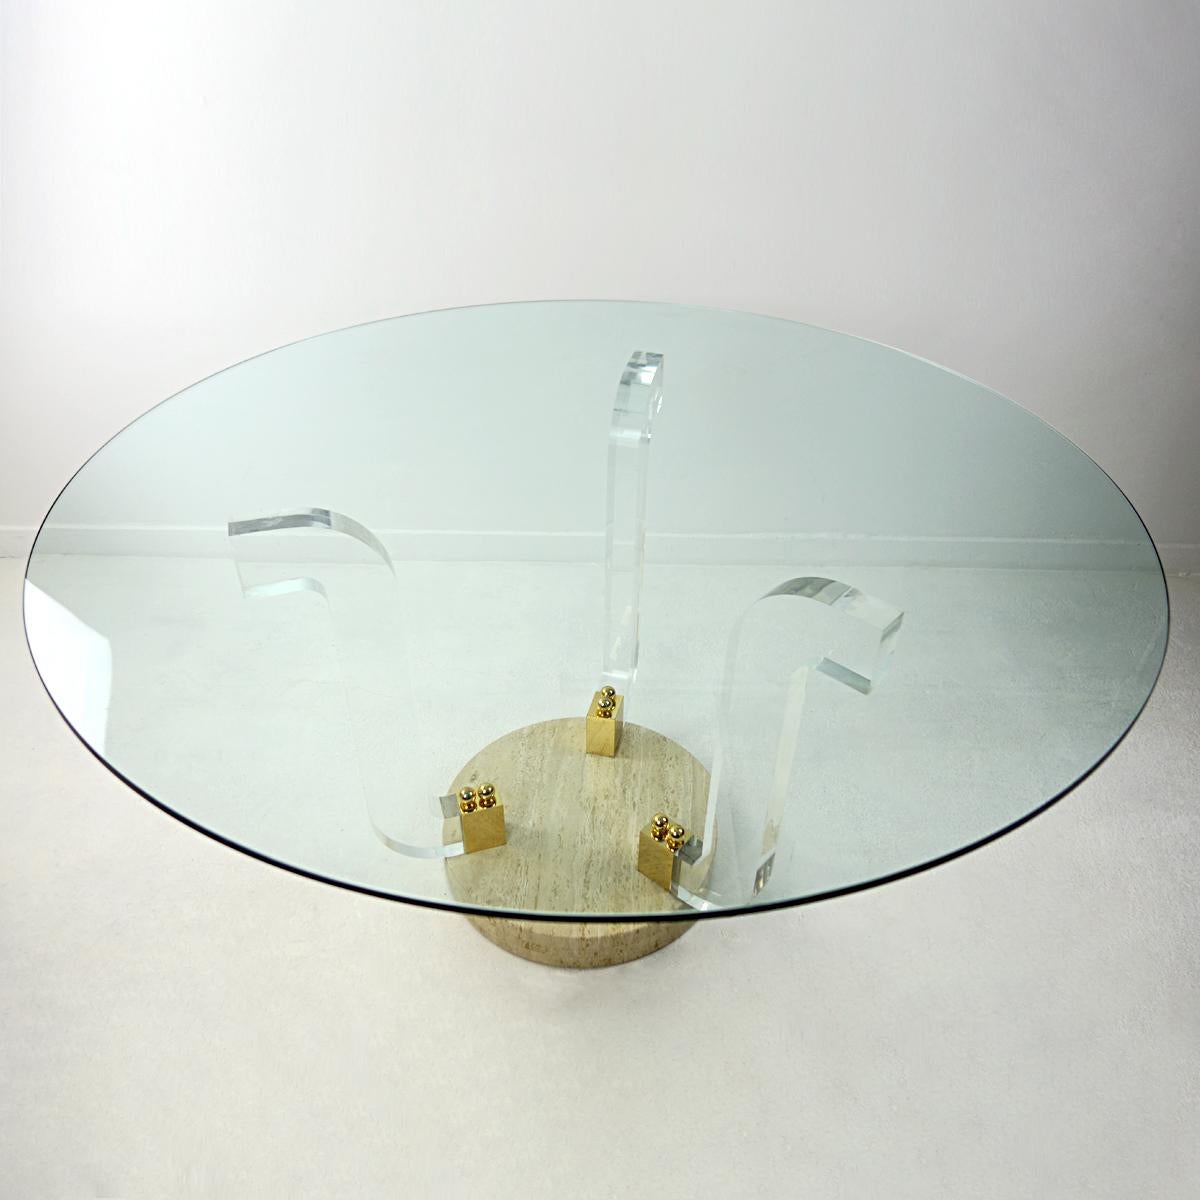 Late 20th Century Hollywood Regency Round Dining Table Marble Foot, Plexiglass and Brass Details